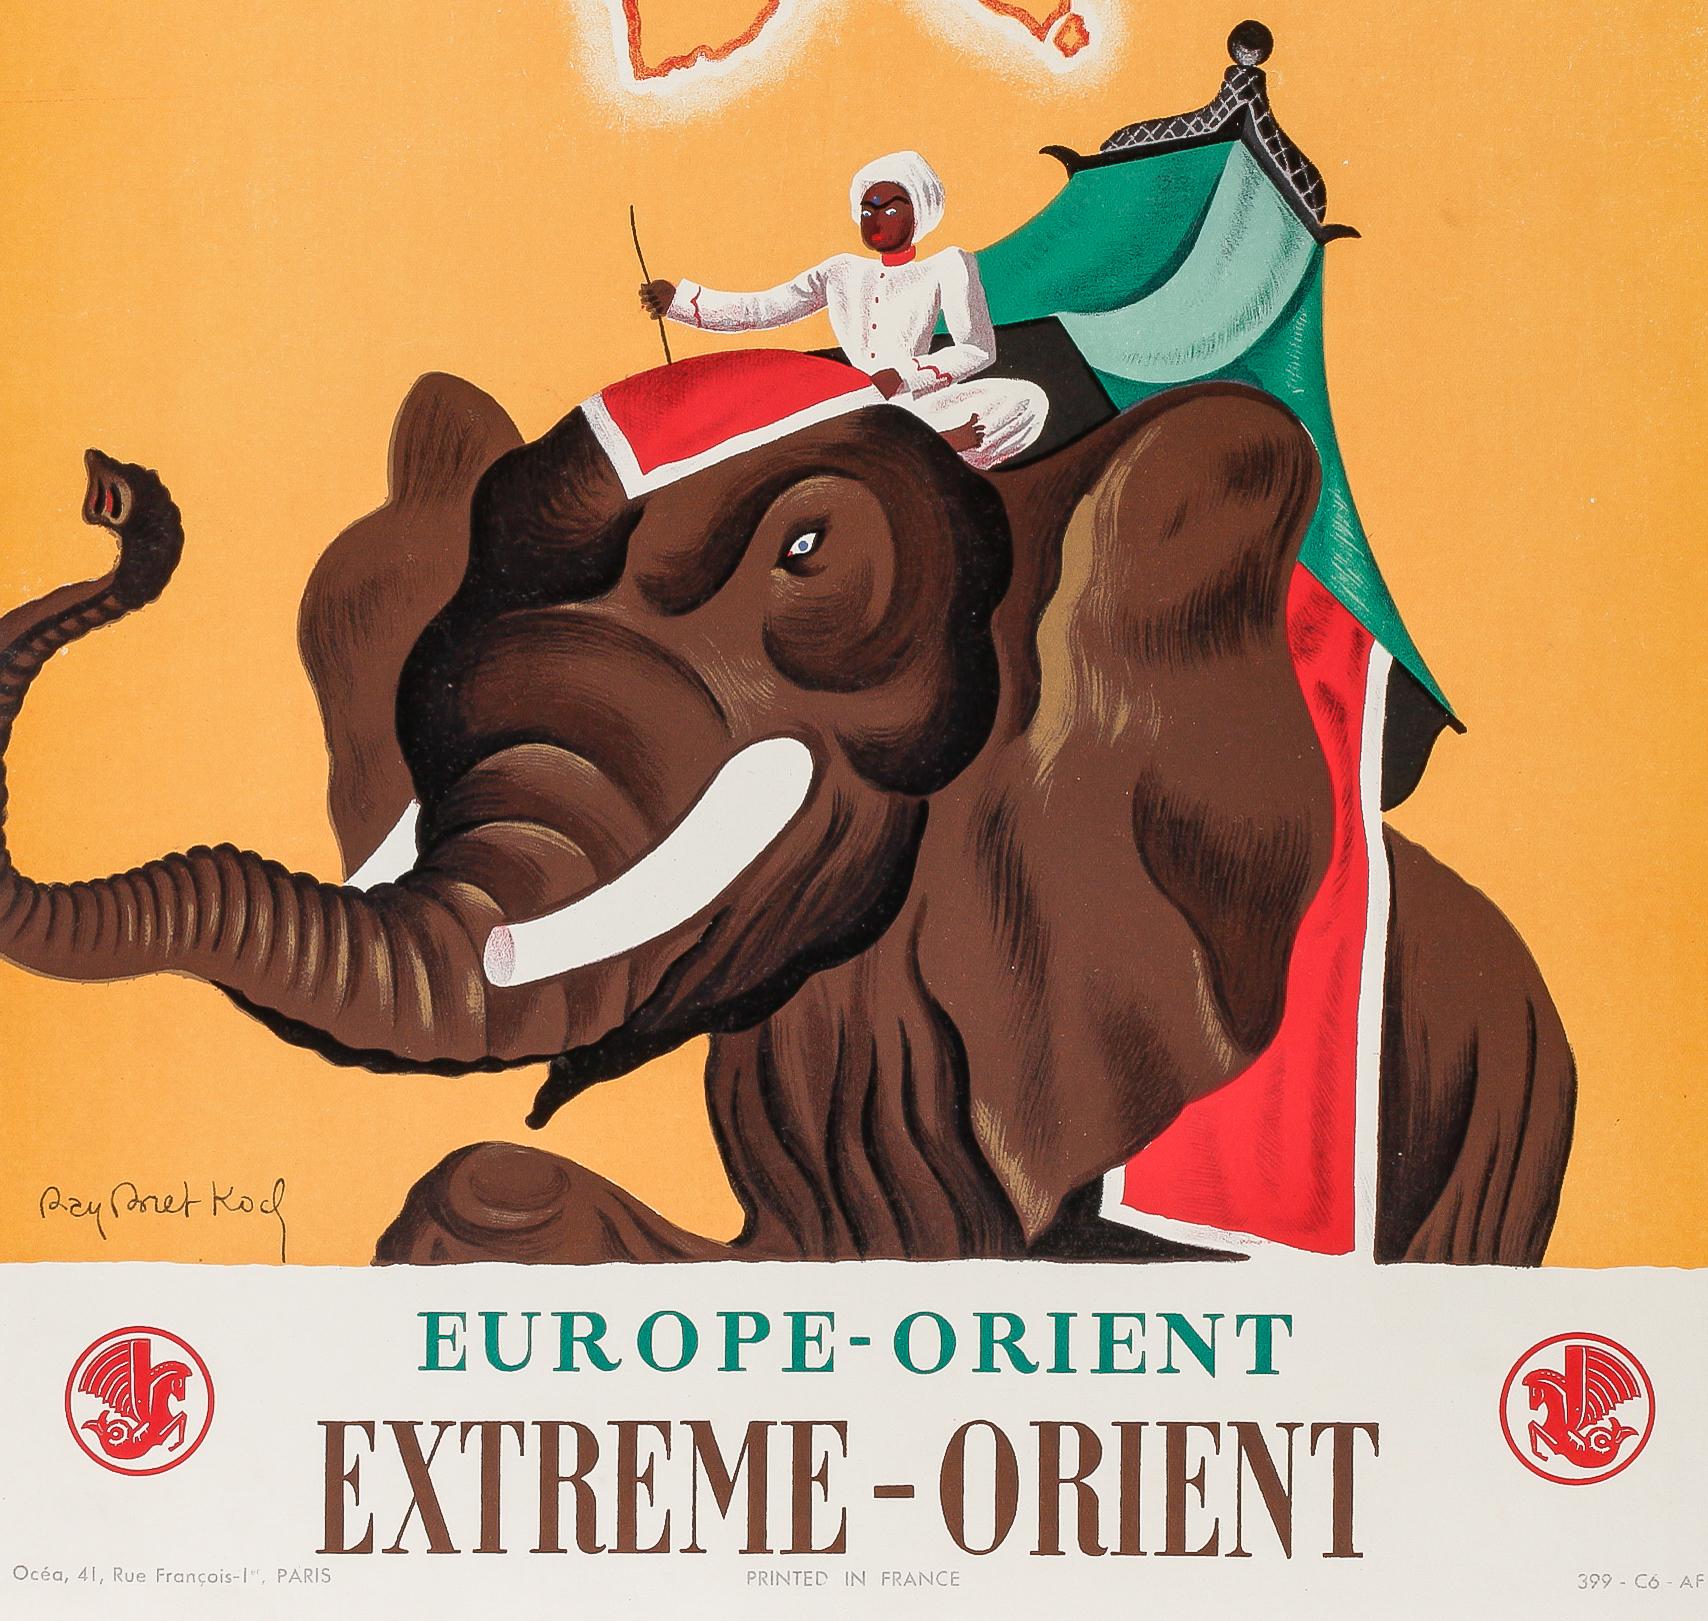 Air France poster created by Ray Bret Koch in 1938 to promote tourism from Europe to the Far East.

Artist: Ray Bret Koch (1902-1996)
Title : Air France – Europe – Orient – Extrême Orient
Date: 1938
Size: 12.3 x 19.4 in. / 31.2 x 49.3 cm.
Printer: